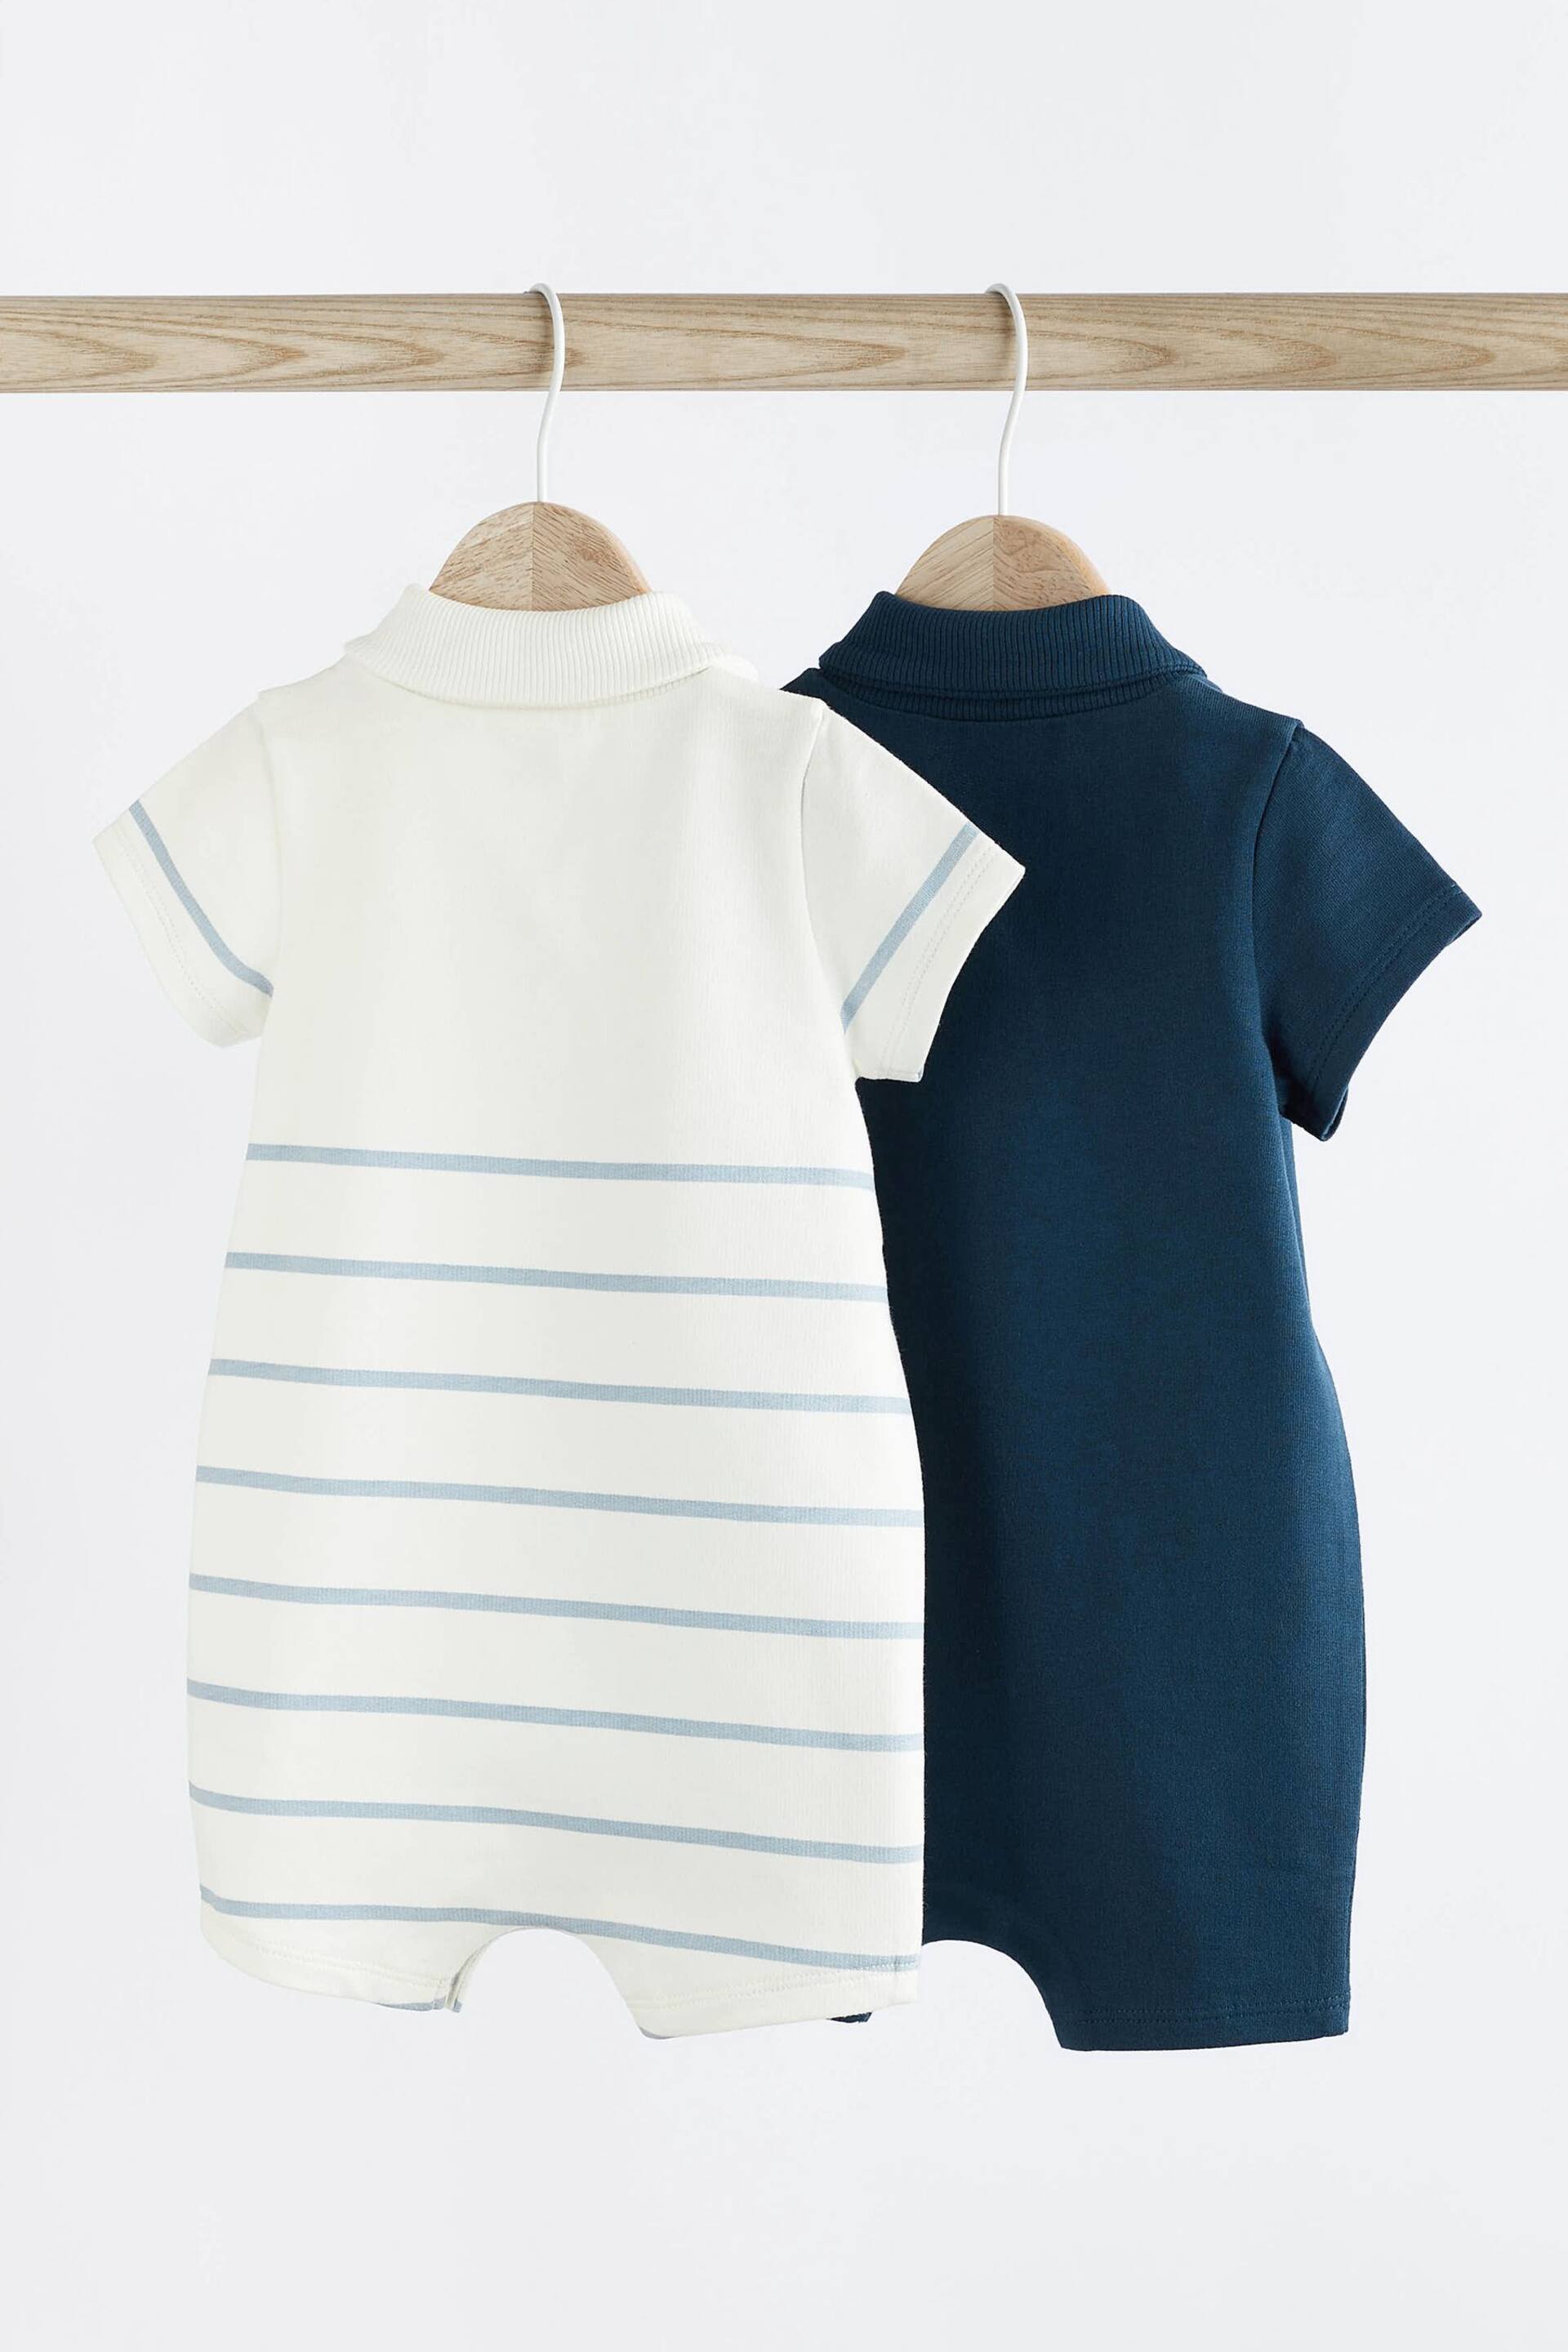 Blue Stripe Collar Jersey Rompers 2 Pack - Image 2 of 6